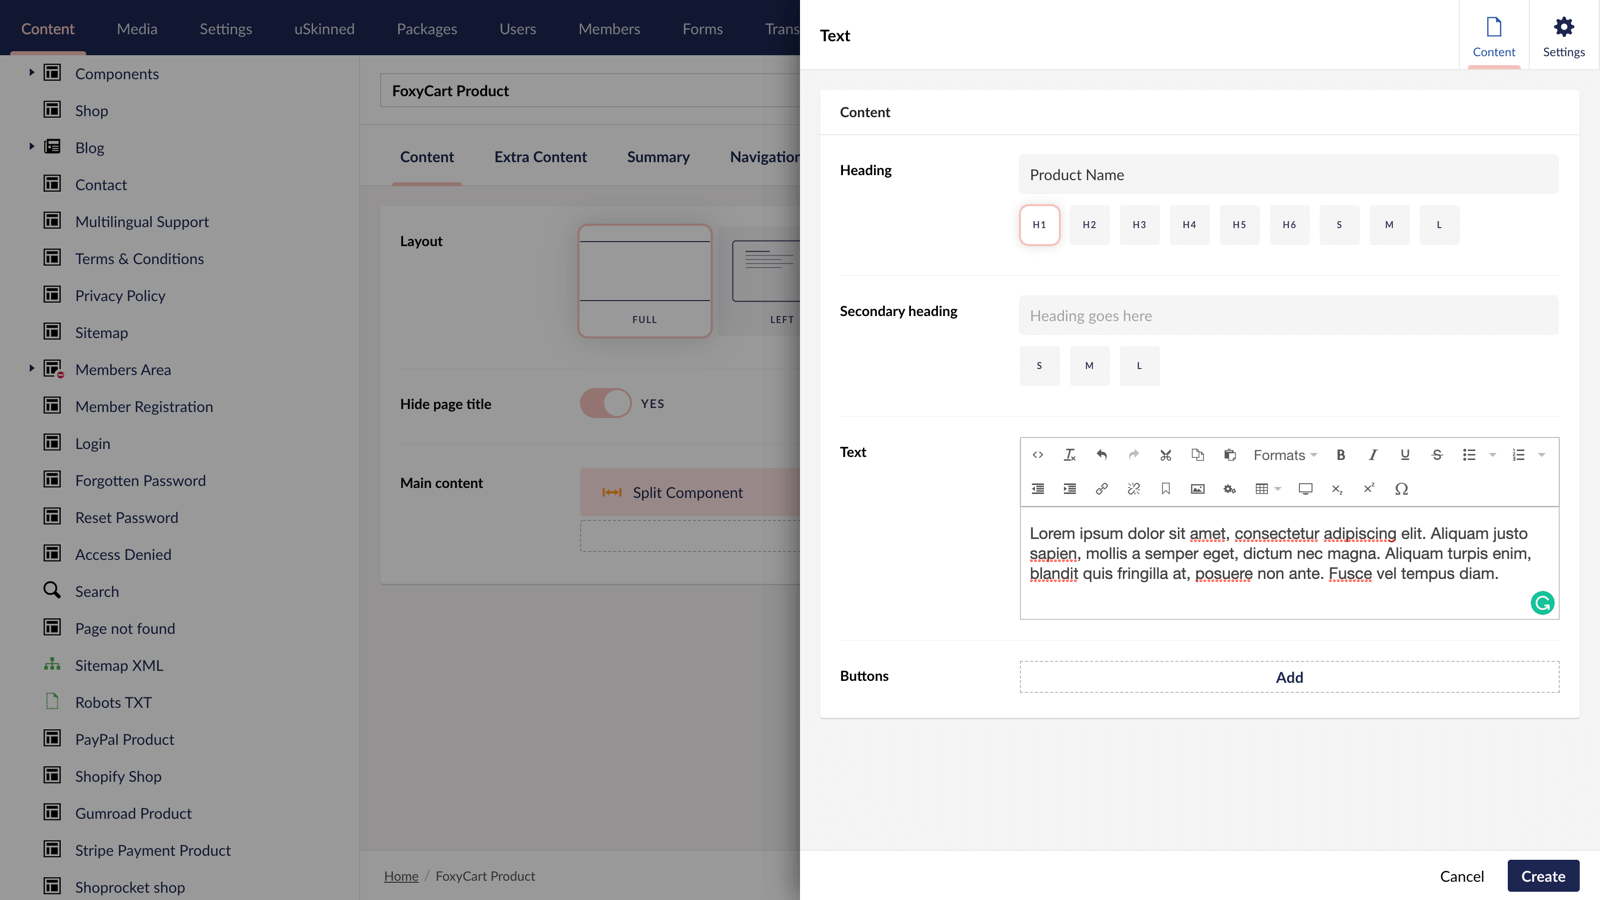 Create Text component for foxycart product in Umbraco.